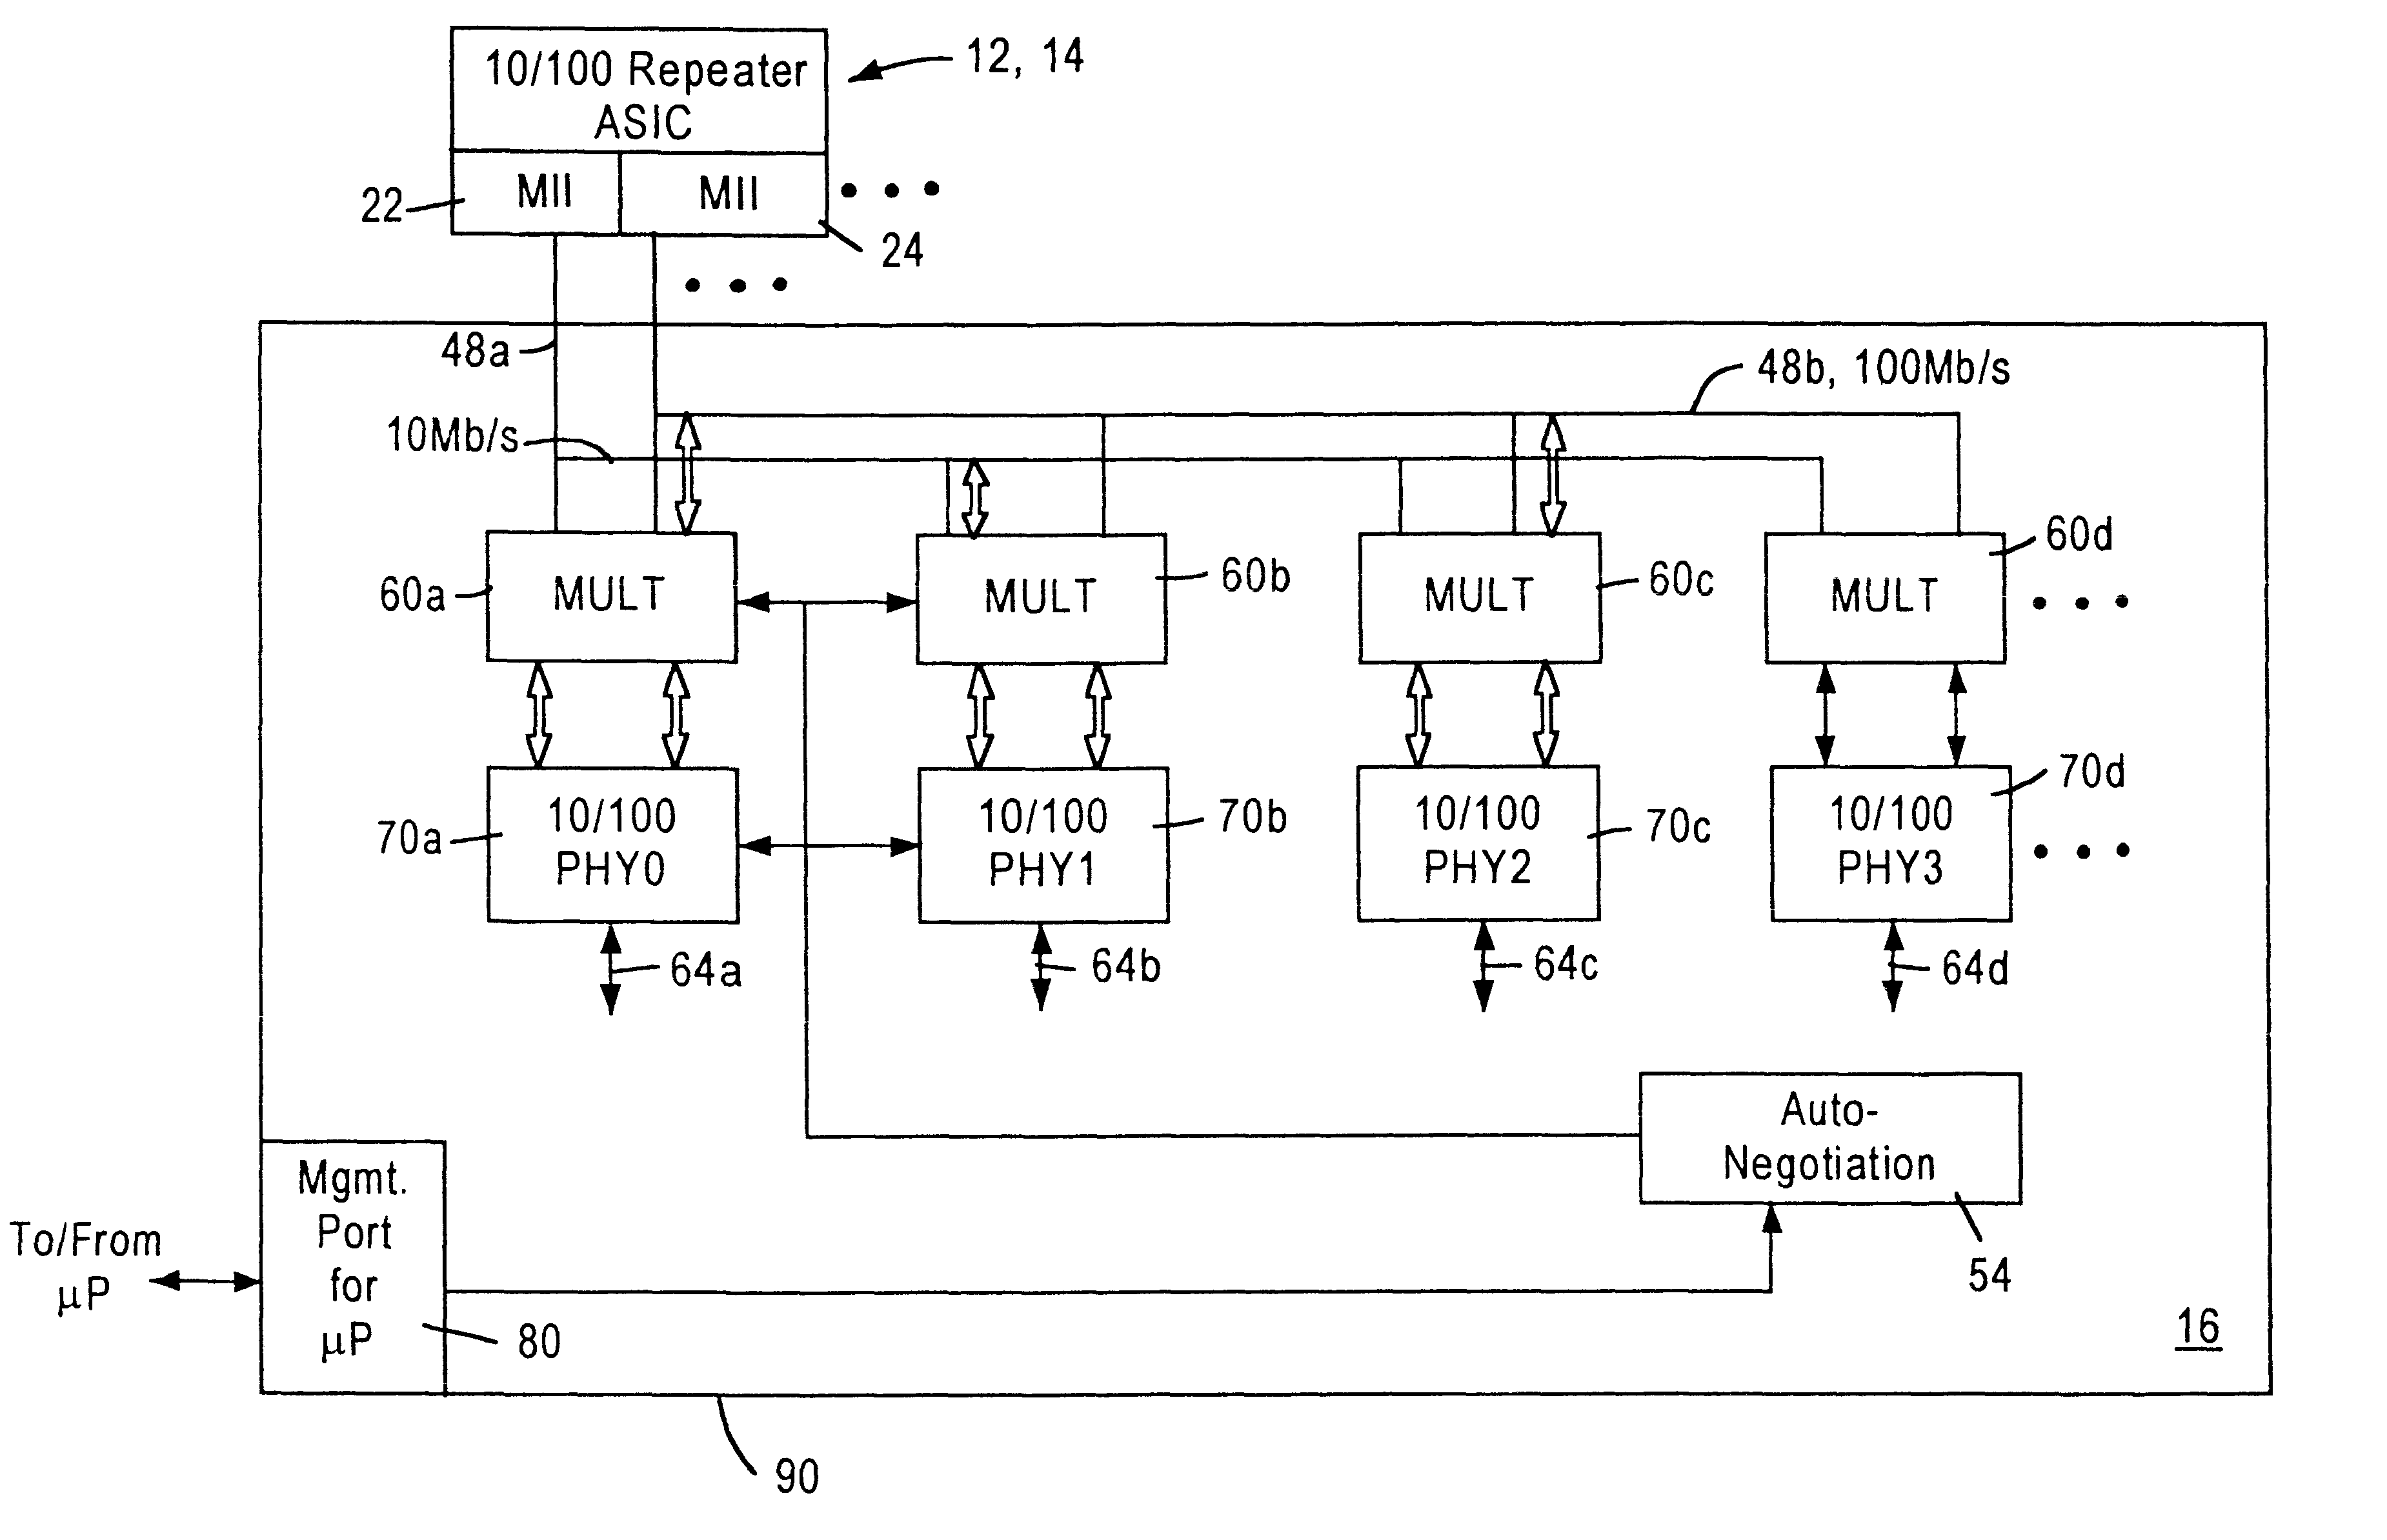 Network transceiver for steering network data to selected paths based on determined link speeds